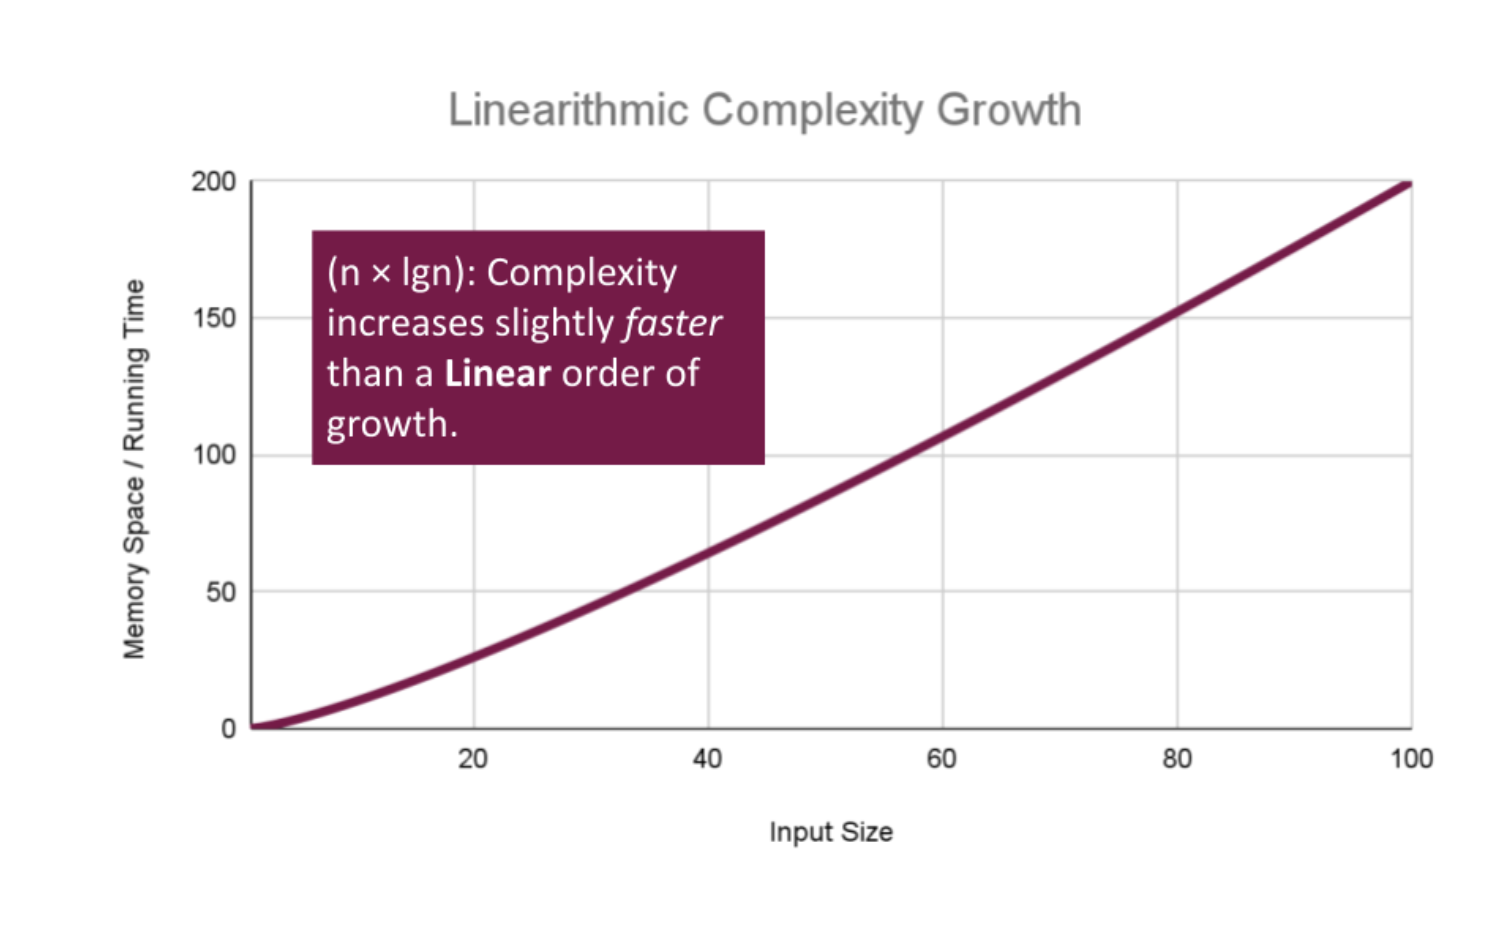 Linearithmic complexity